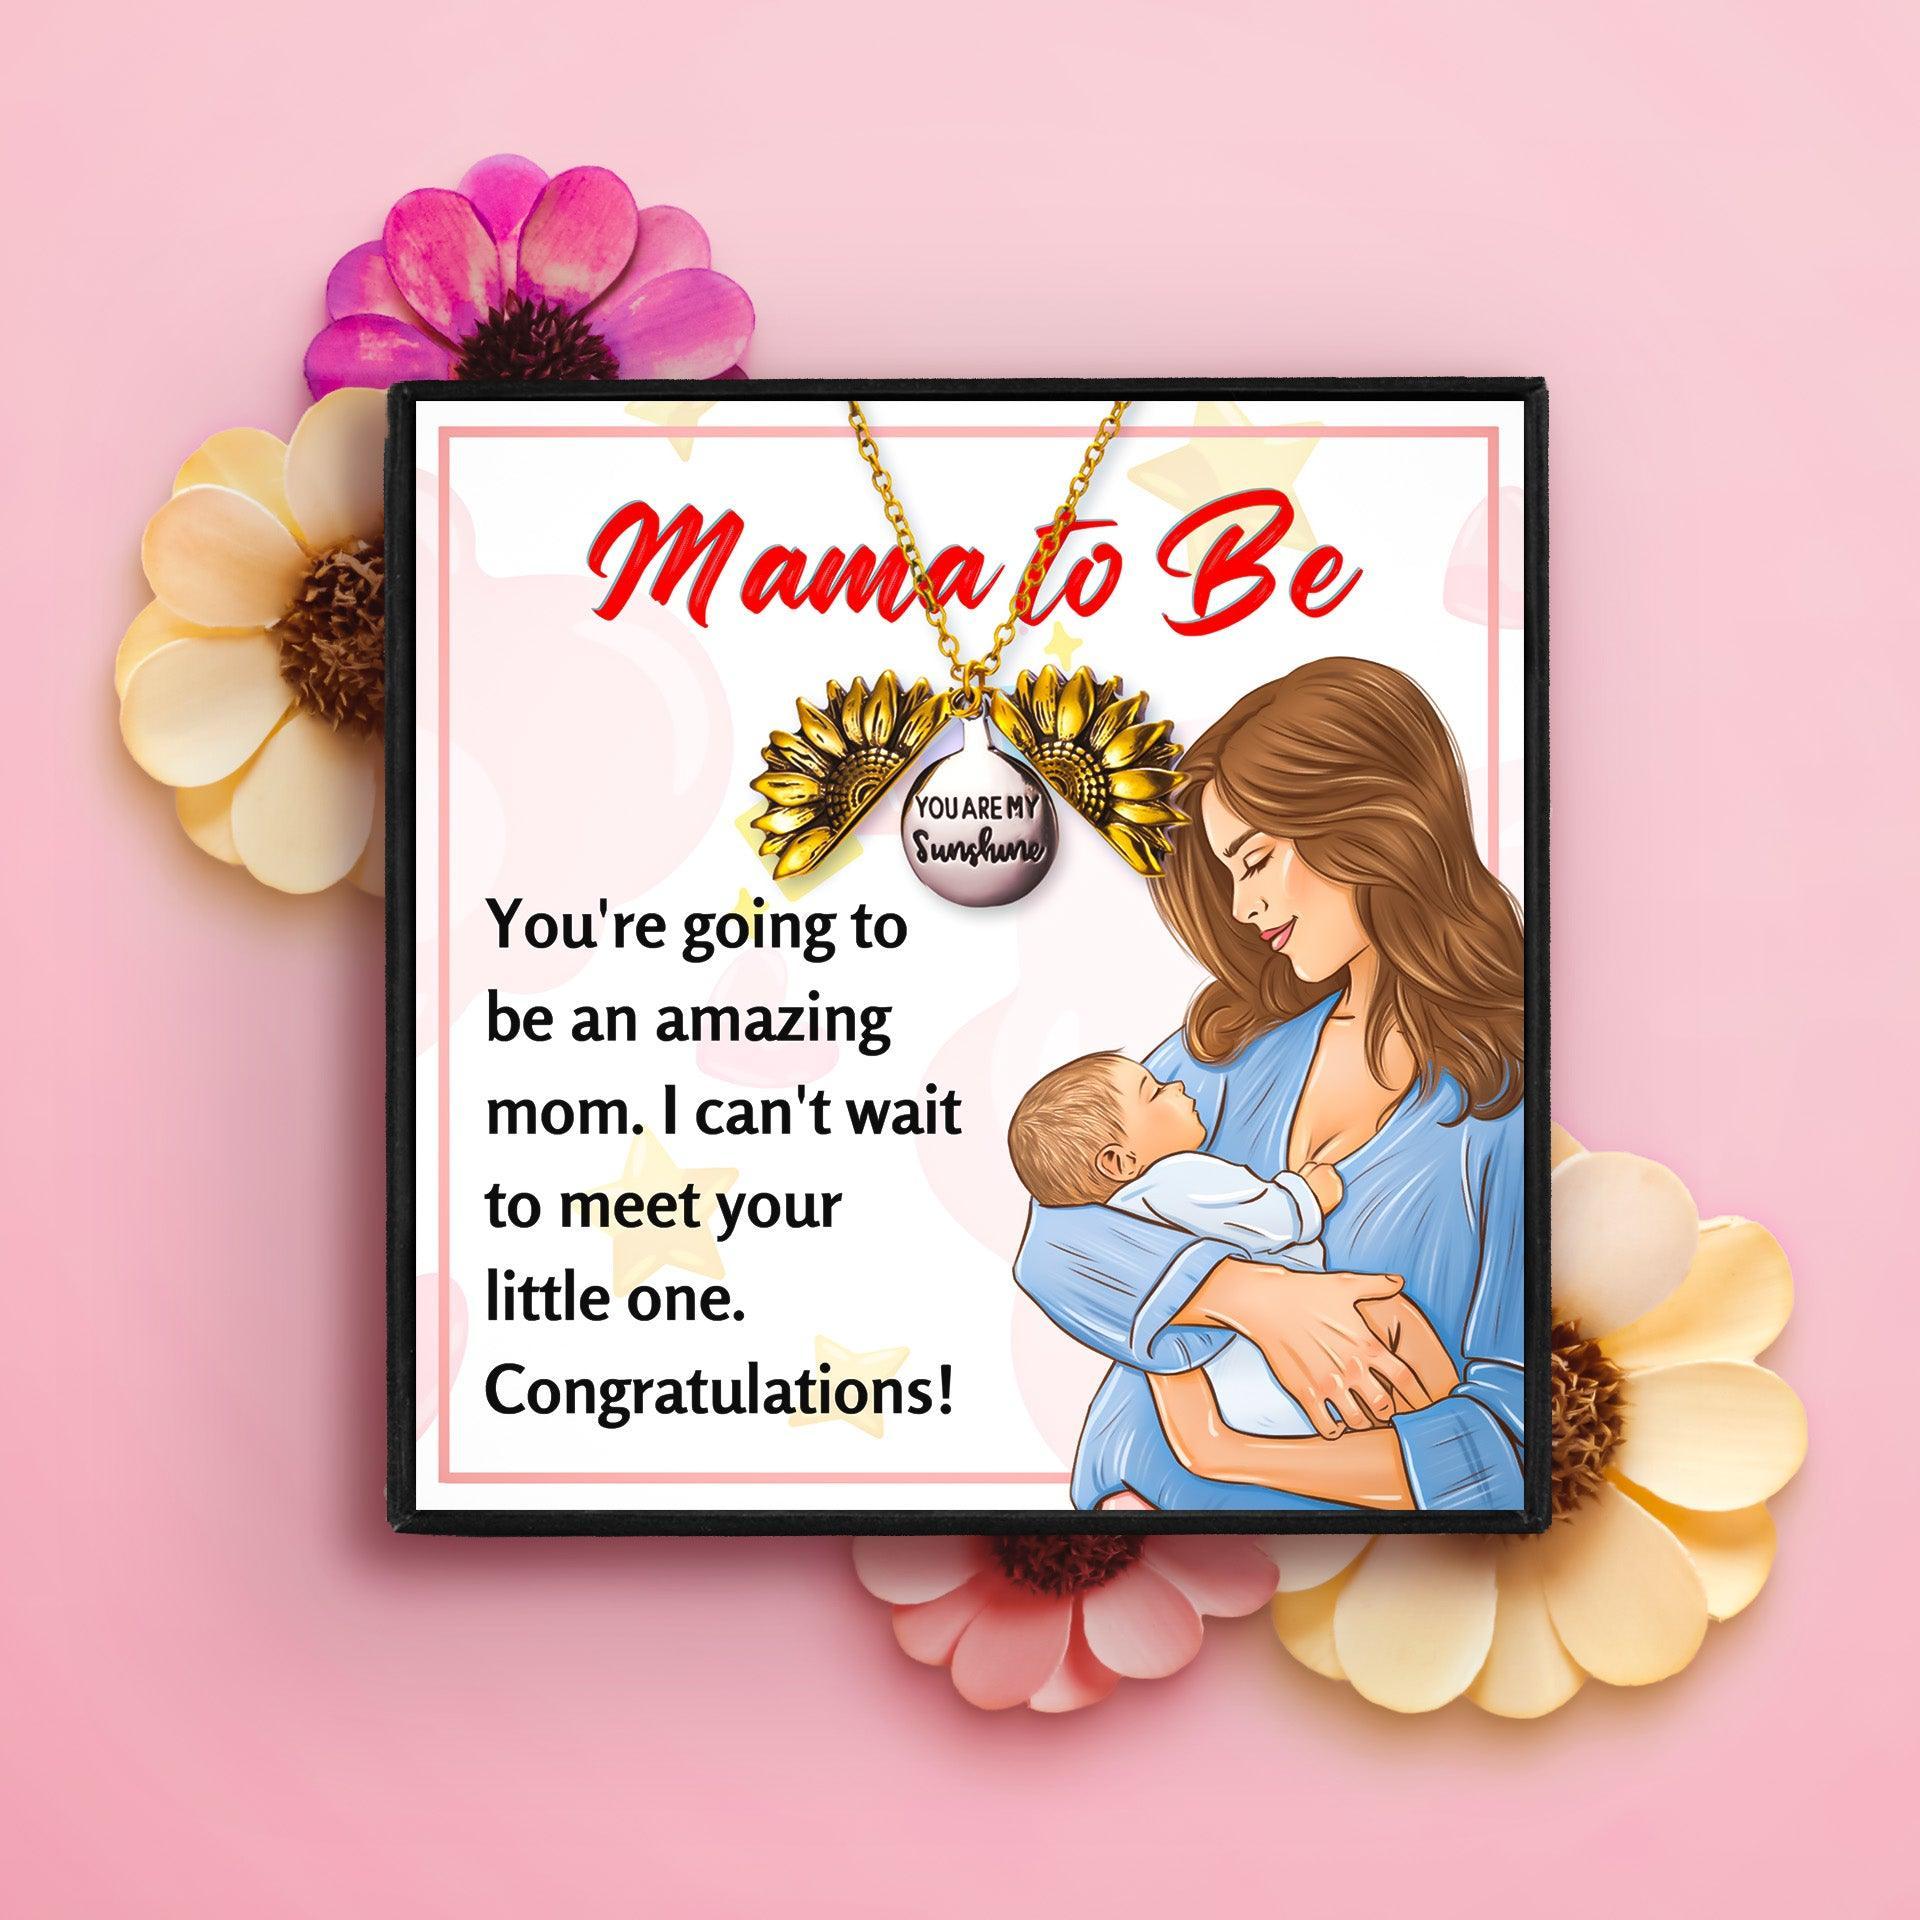 Meaningful Necklace Gifts For Expecting Moms in 2023 | Meaningful Necklace Gifts For Expecting Moms - undefined | Gifts for Pregnant Women, mama to be necklace, mom to be necklace, New Mom Jewelry | From Hunny Life | hunnylife.com